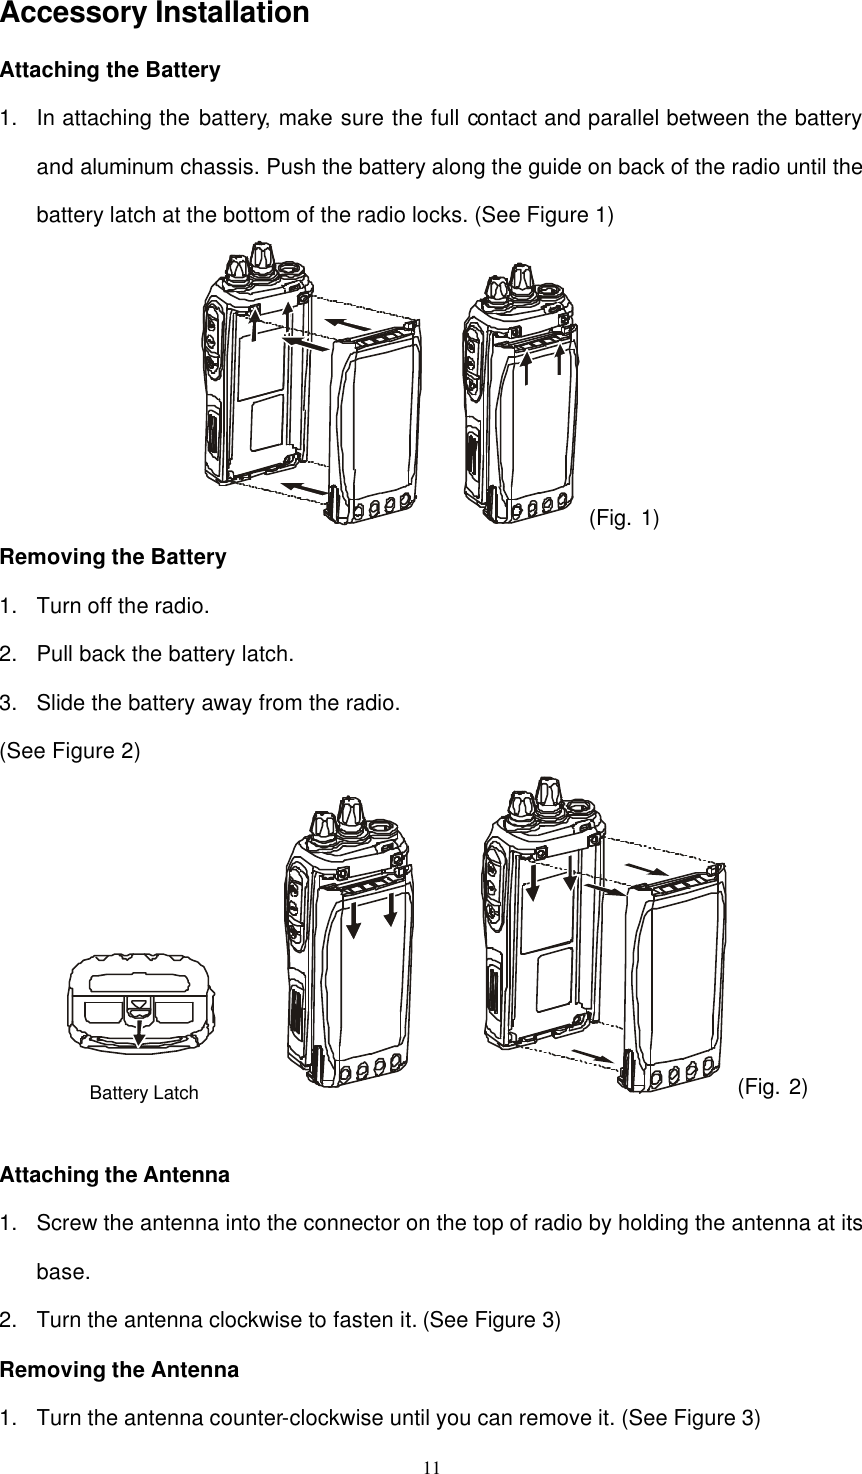  11 Accessory Installation Attaching the Battery 1. In attaching the battery, make sure the full contact and parallel between the battery and aluminum chassis. Push the battery along the guide on back of the radio until the battery latch at the bottom of the radio locks. (See Figure 1)  (Fig. 1) Removing the Battery 1. Turn off the radio. 2. Pull back the battery latch. 3. Slide the battery away from the radio. (See Figure 2) 　 (Fig. 2)  Attaching the Antenna 1. Screw the antenna into the connector on the top of radio by holding the antenna at its base. 2. Turn the antenna clockwise to fasten it. (See Figure 3) Removing the Antenna 1. Turn the antenna counter-clockwise until you can remove it. (See Figure 3) Battery Latch 